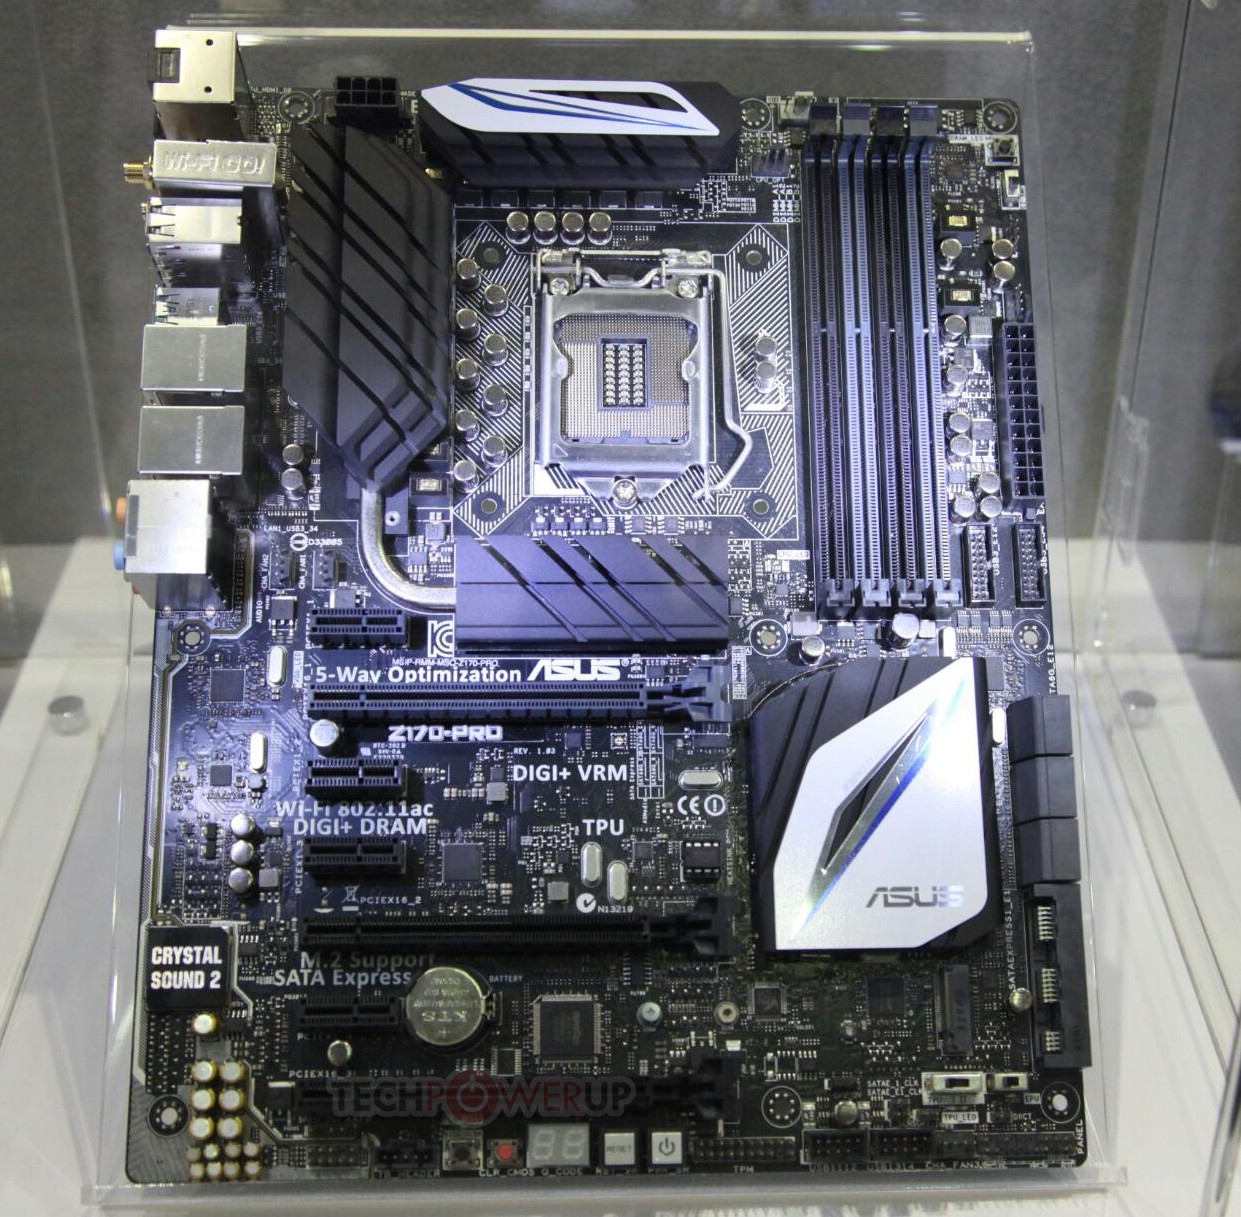 ASUS Z170 Motherboard Lineup to Retail Design Scheme from X99 Series